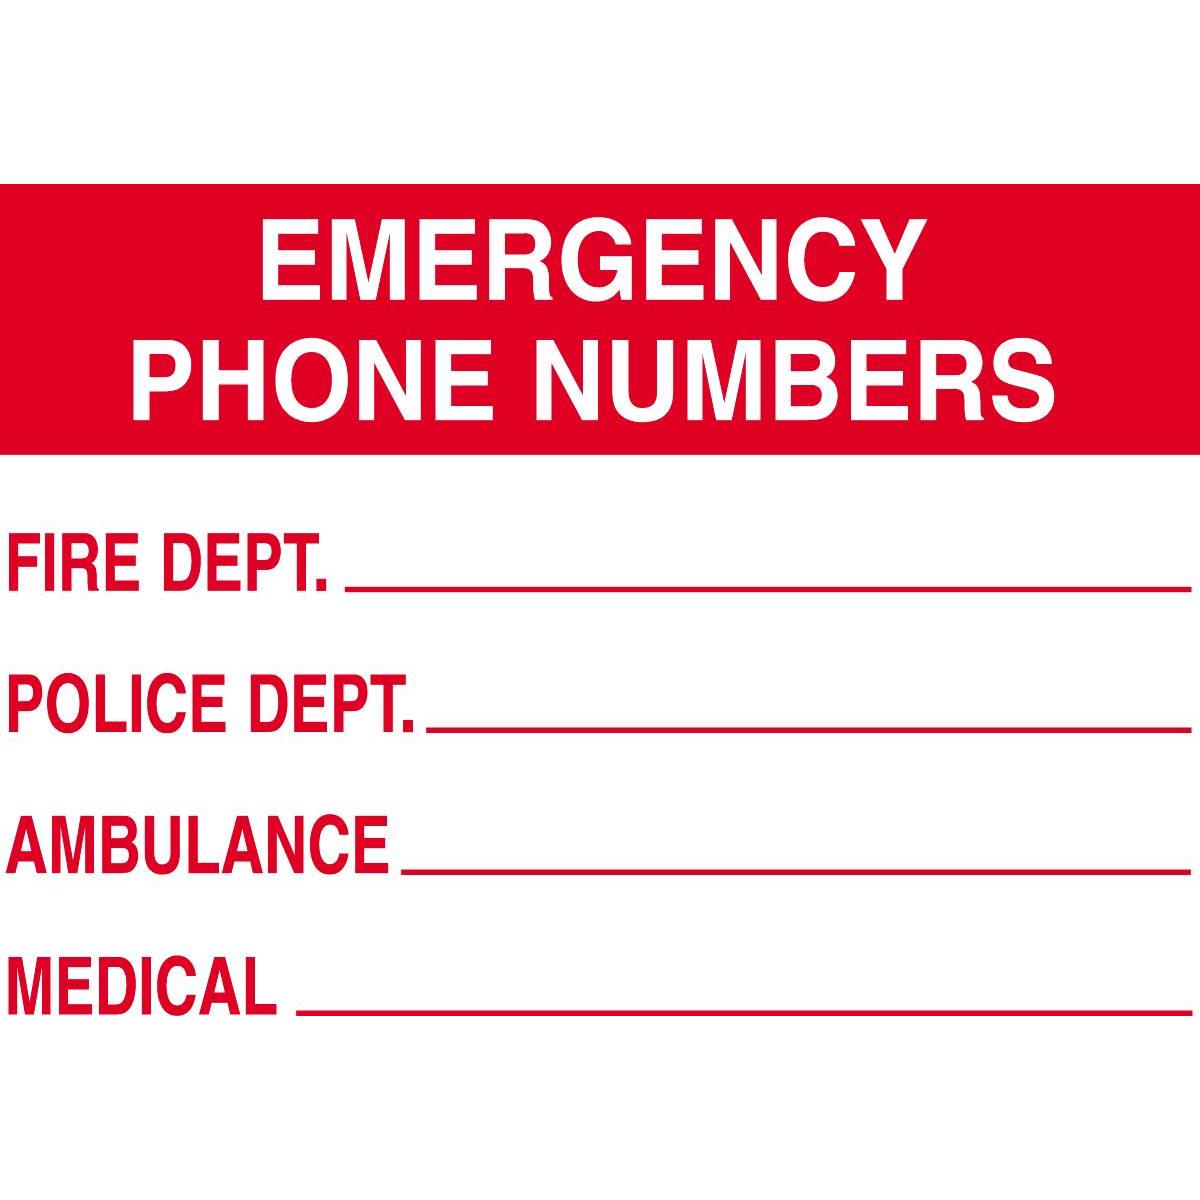 Emergency Phone Numbers Sign   Gempler S